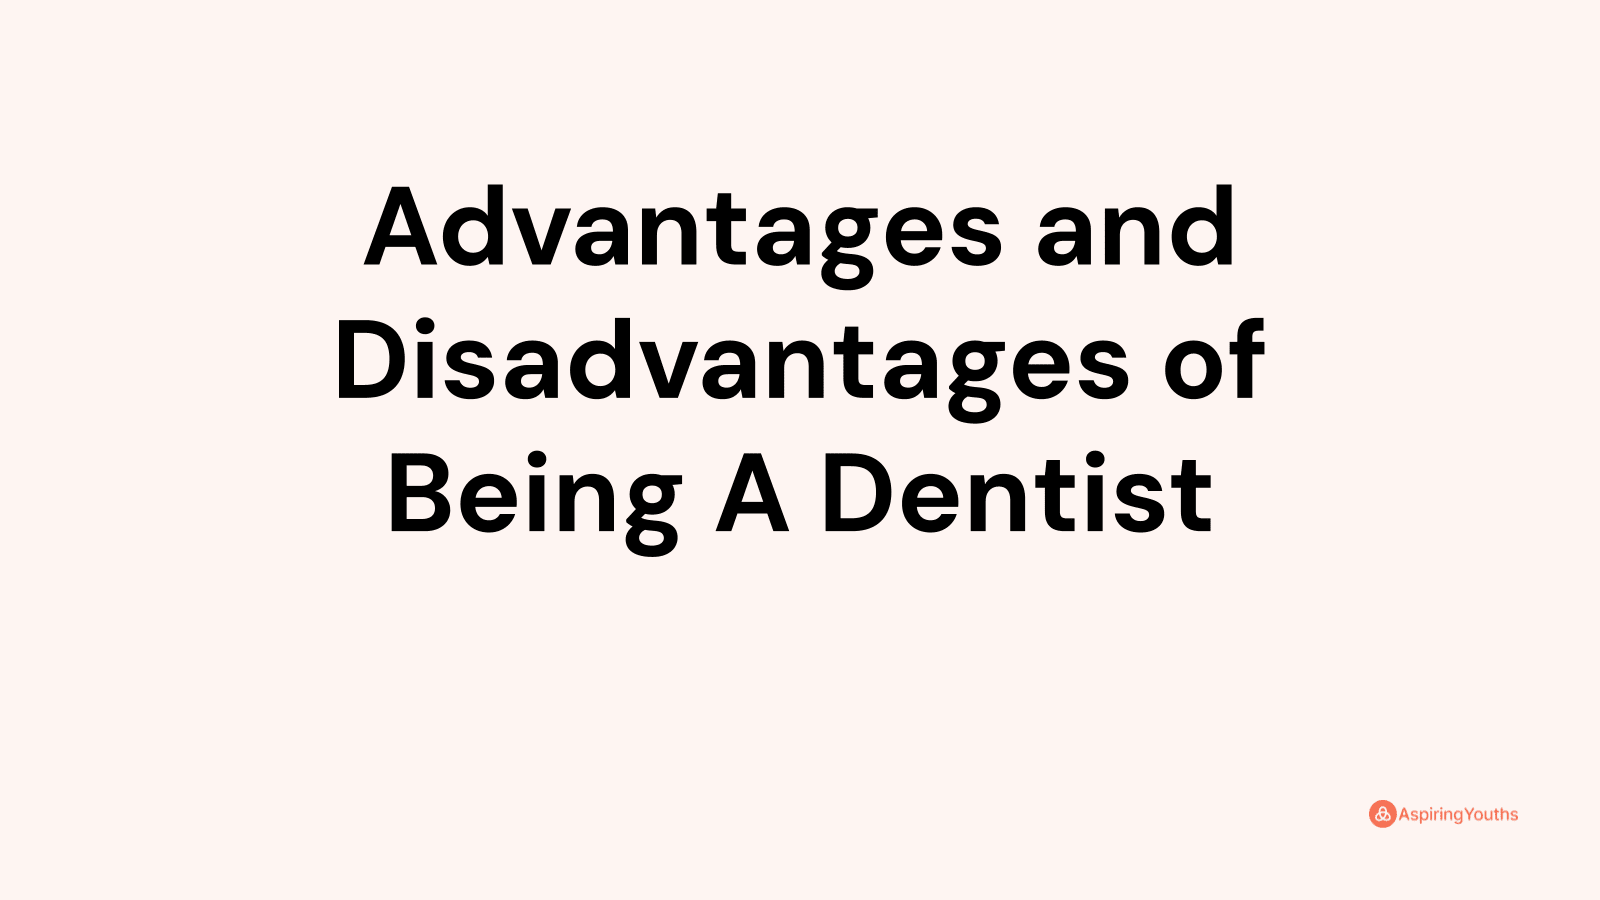 Advantages and disadvantages of Being A Dentist